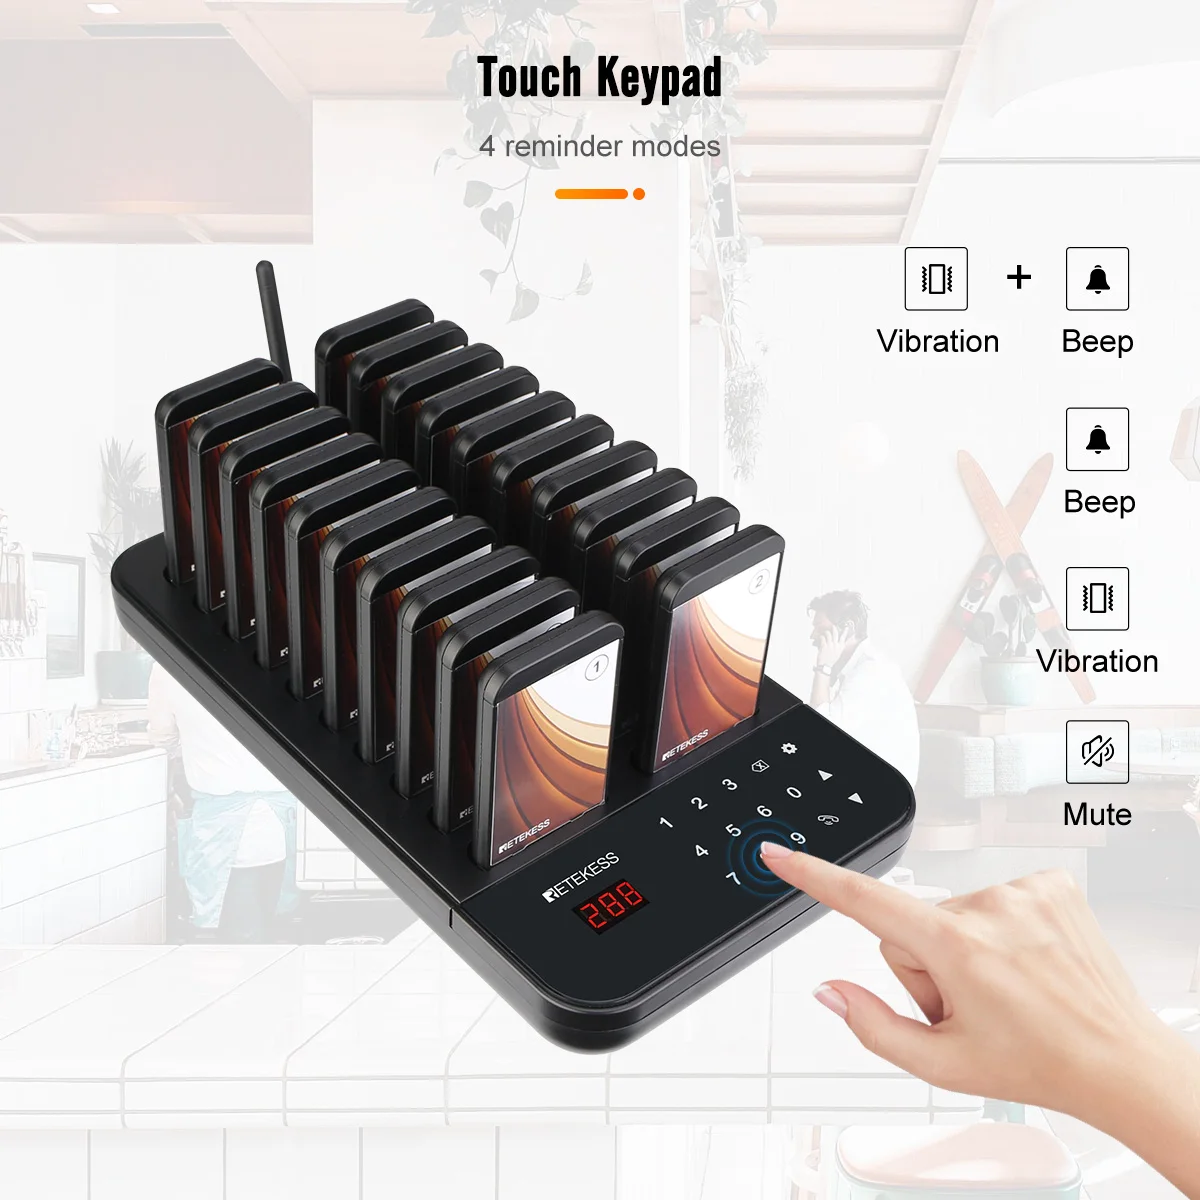 Retekess TD173 Restaurant Pager For Food Truck Coffee Wireless Calling System Vibrator Coaster Bell Buzzer Receivers Bar Chef images - 6